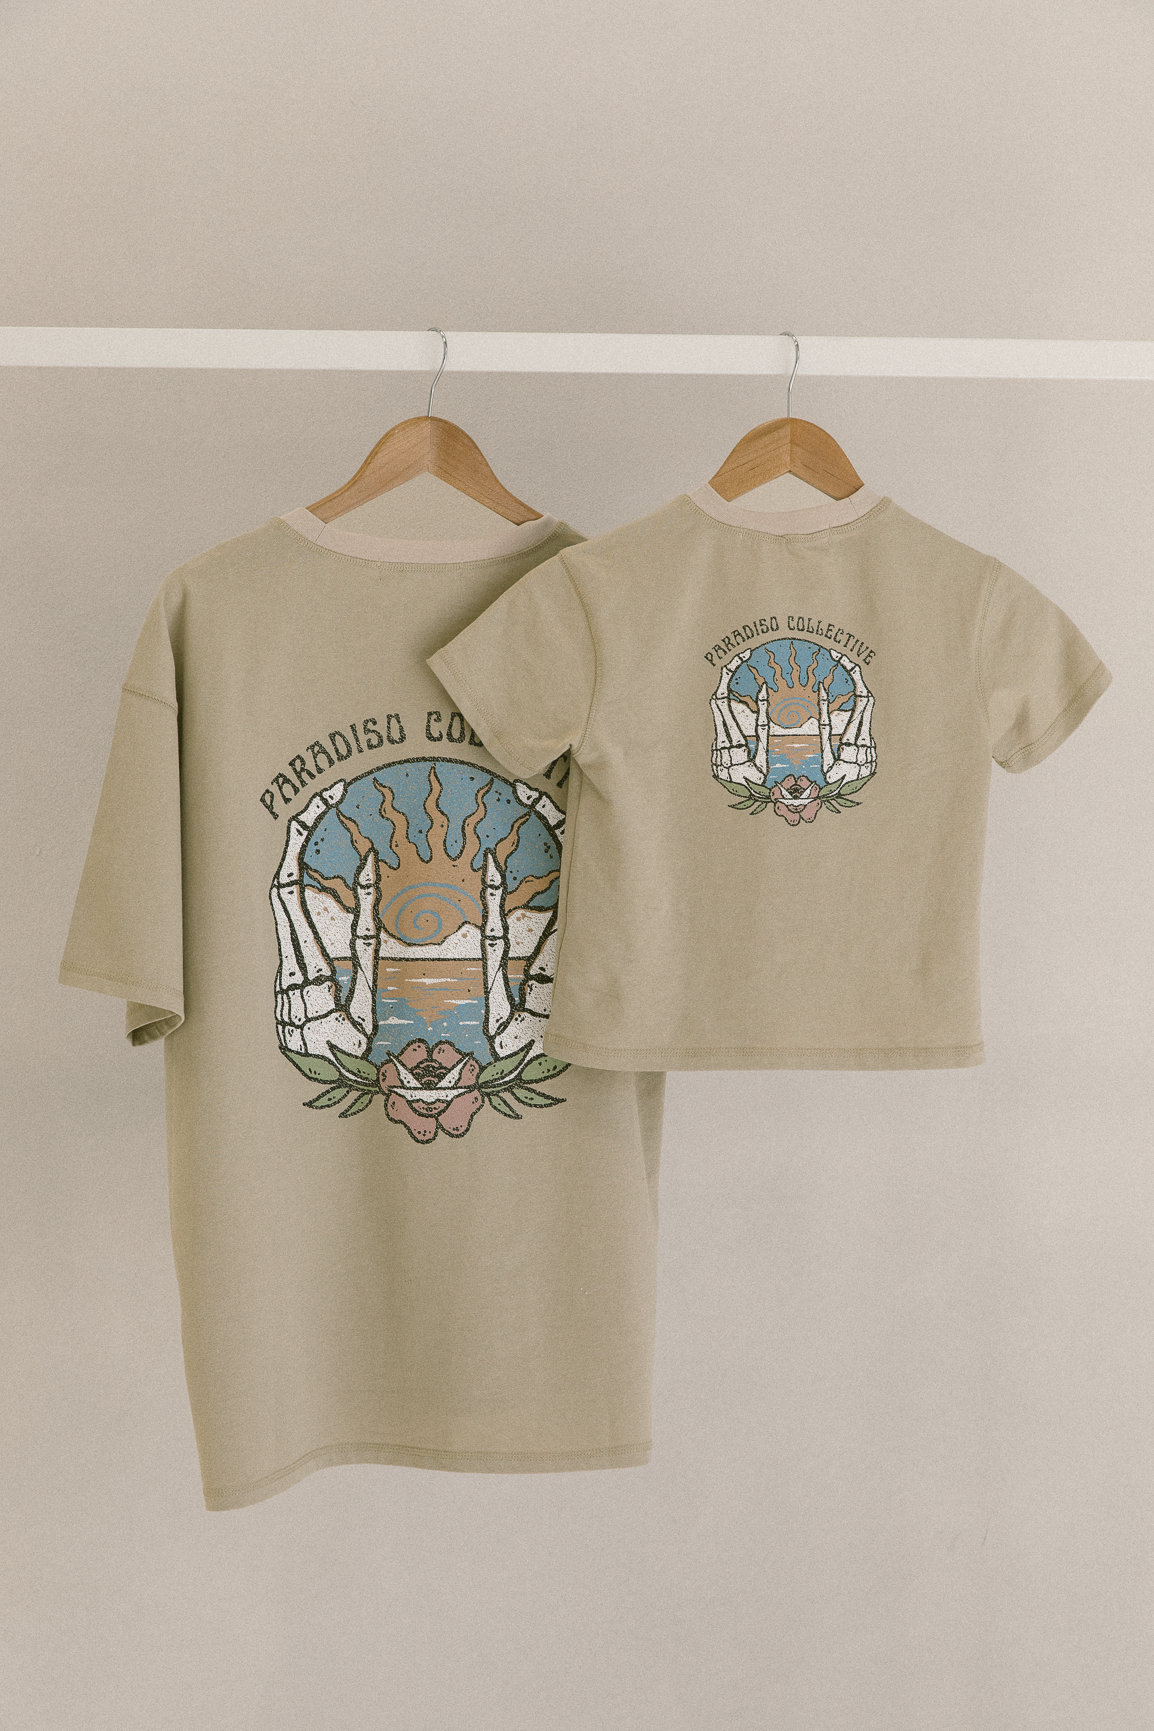 Paradiso Collective Children's Wear | Mini Soleil Tee | Afterpay